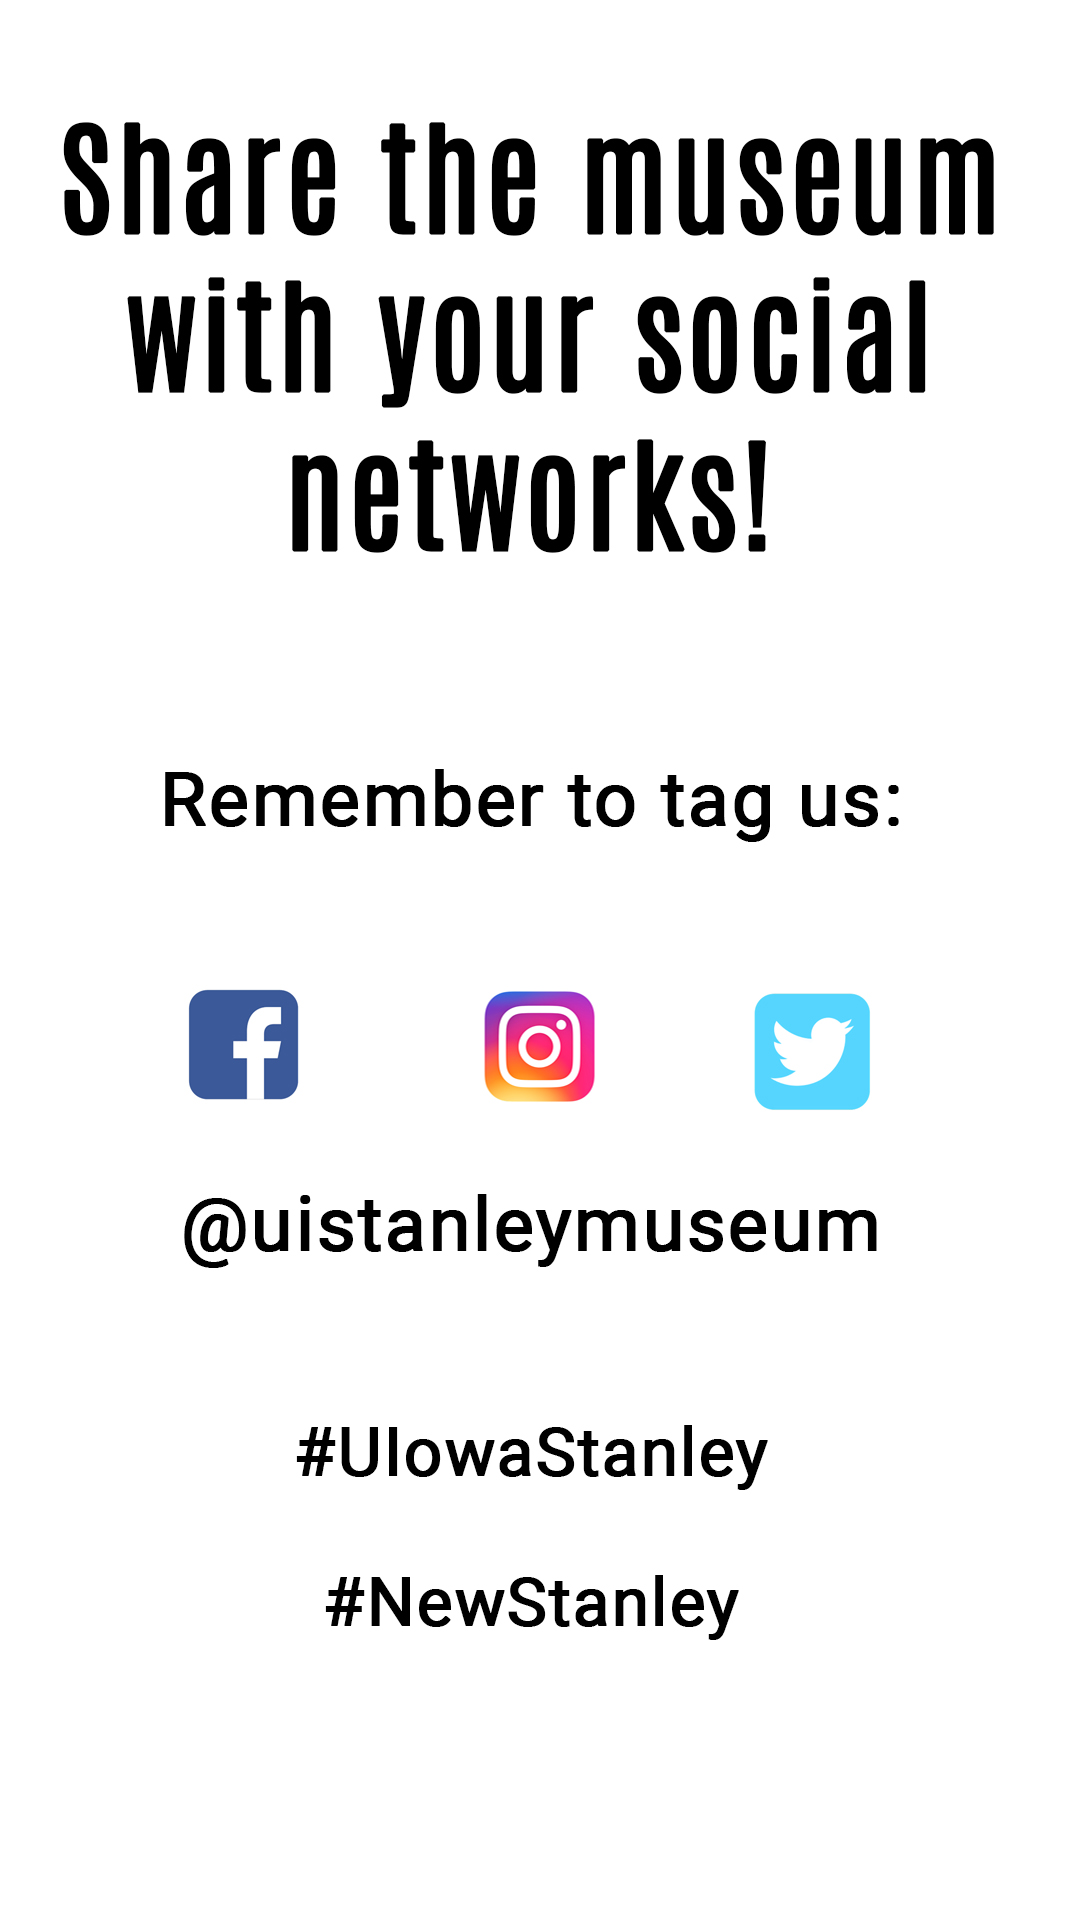 Share the museum with your social networks